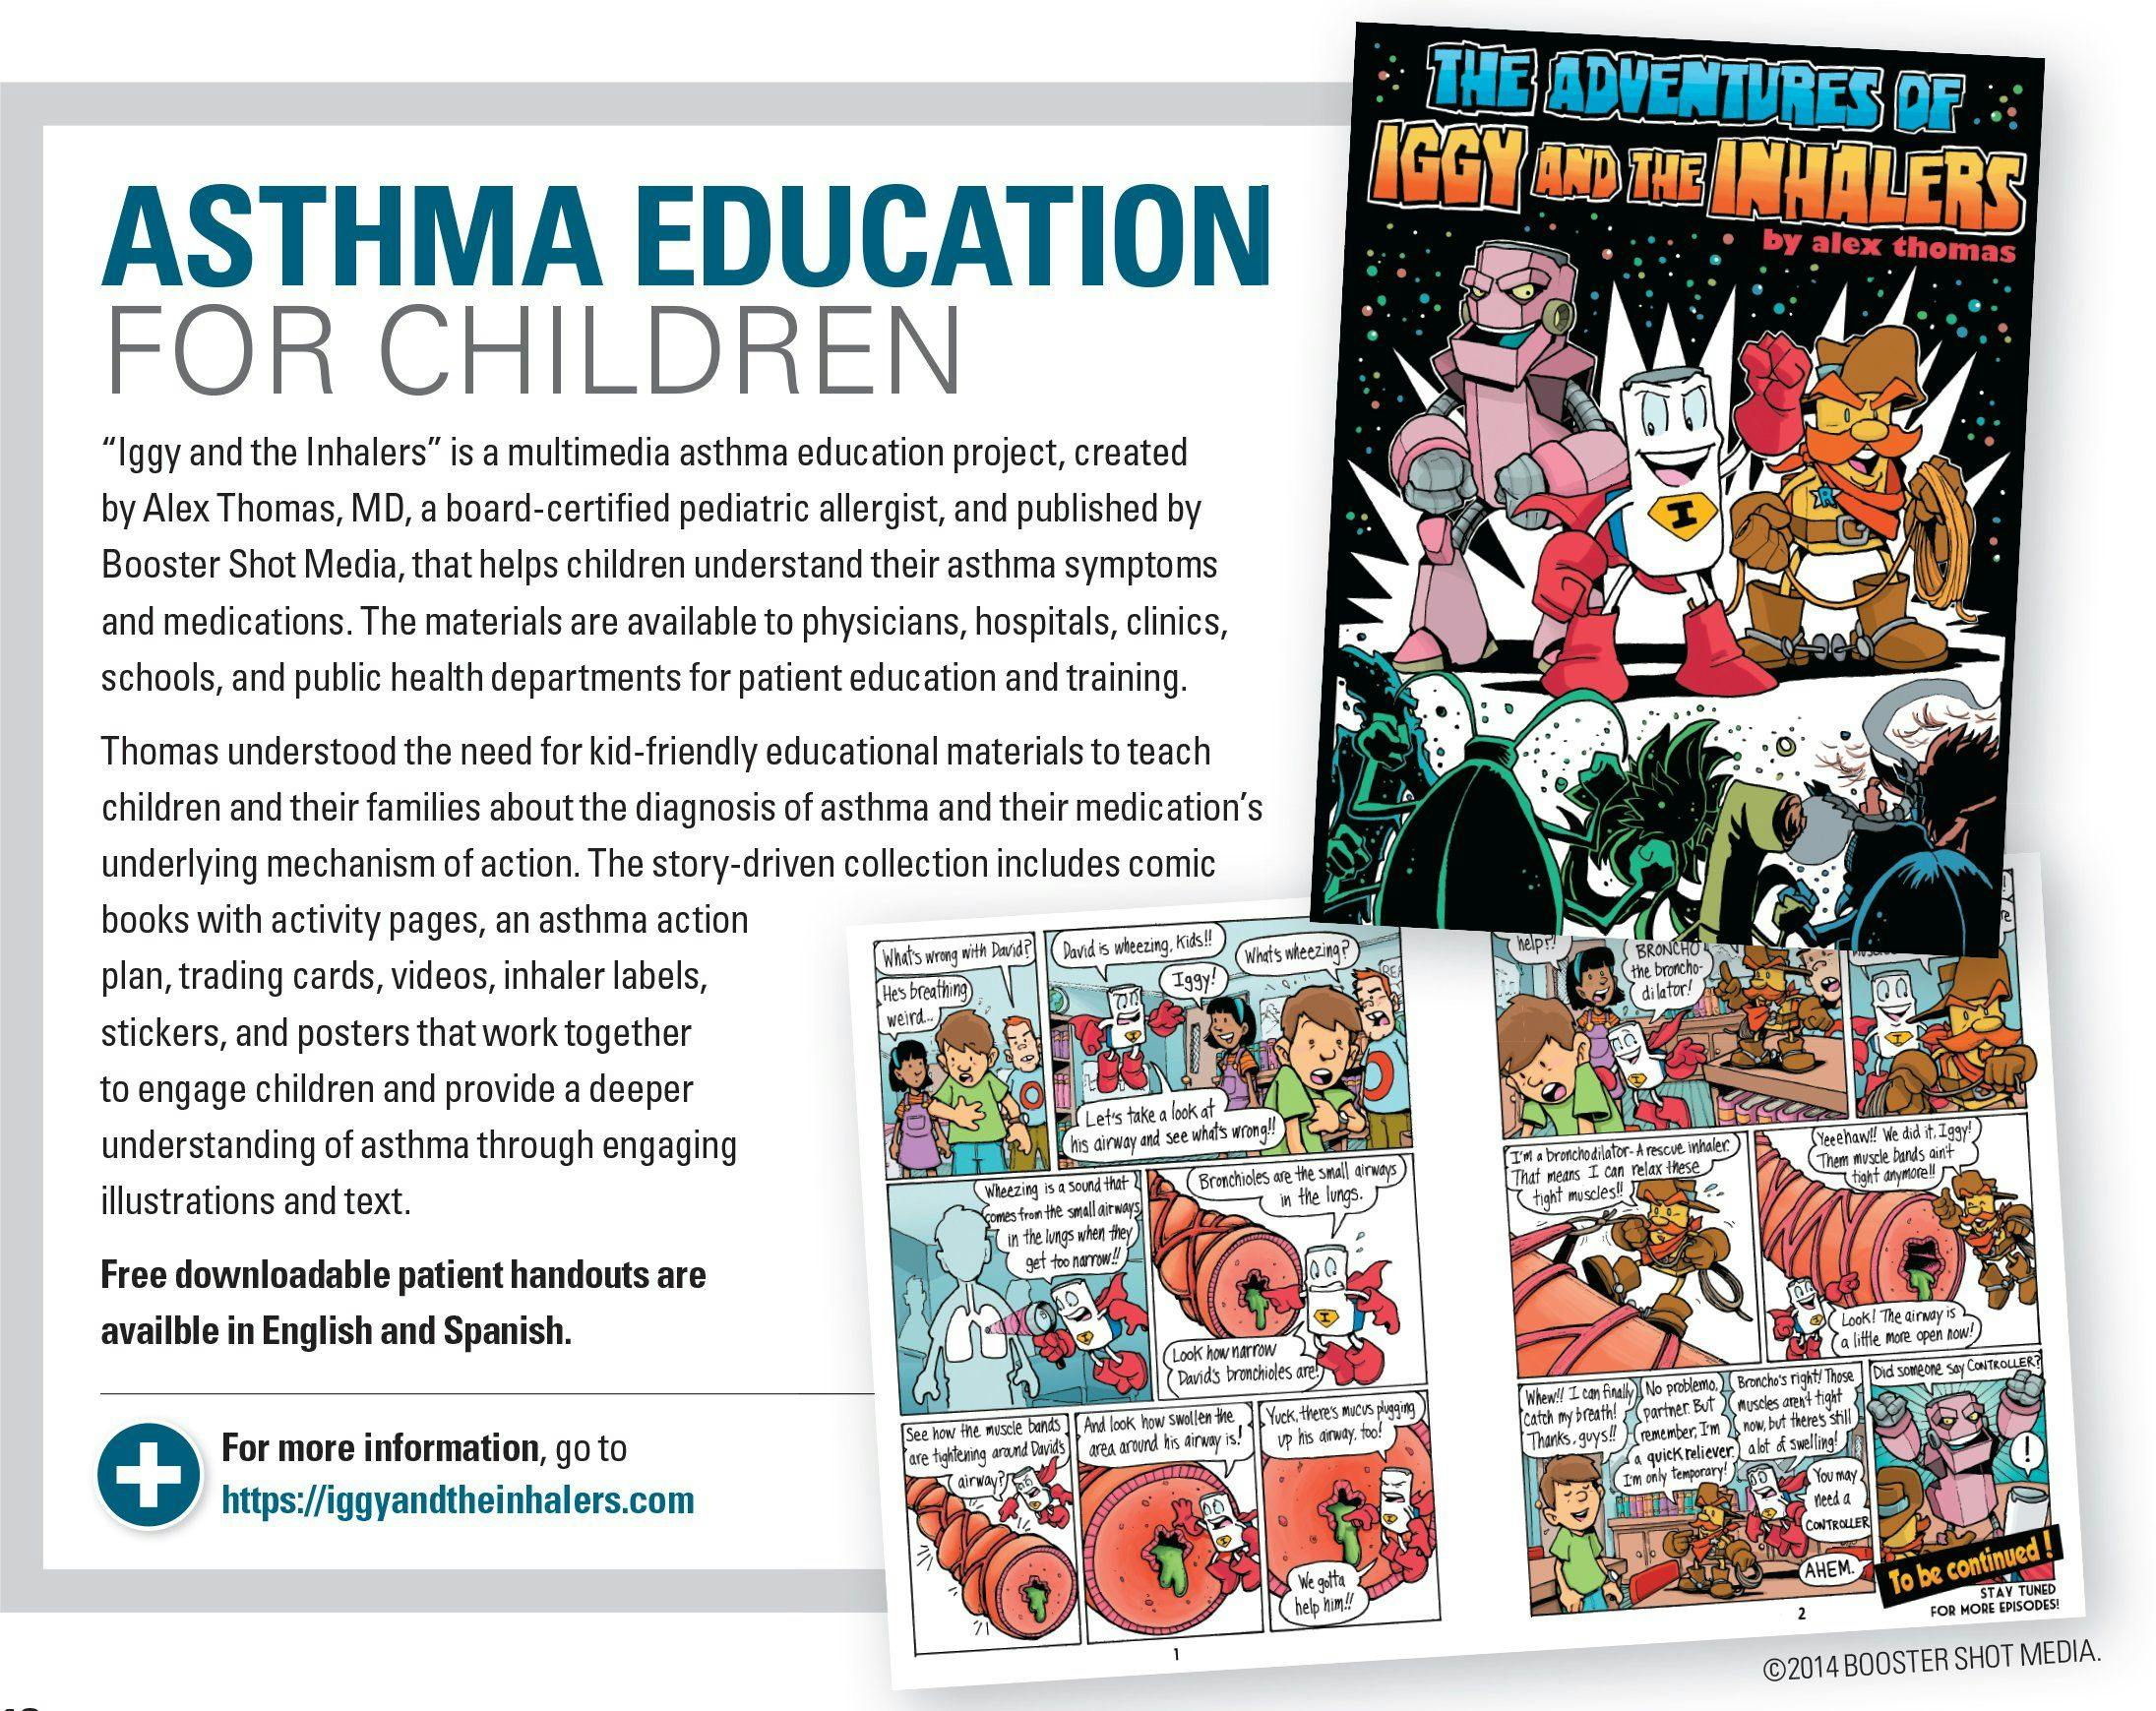 sidebar looking at asthma education for children